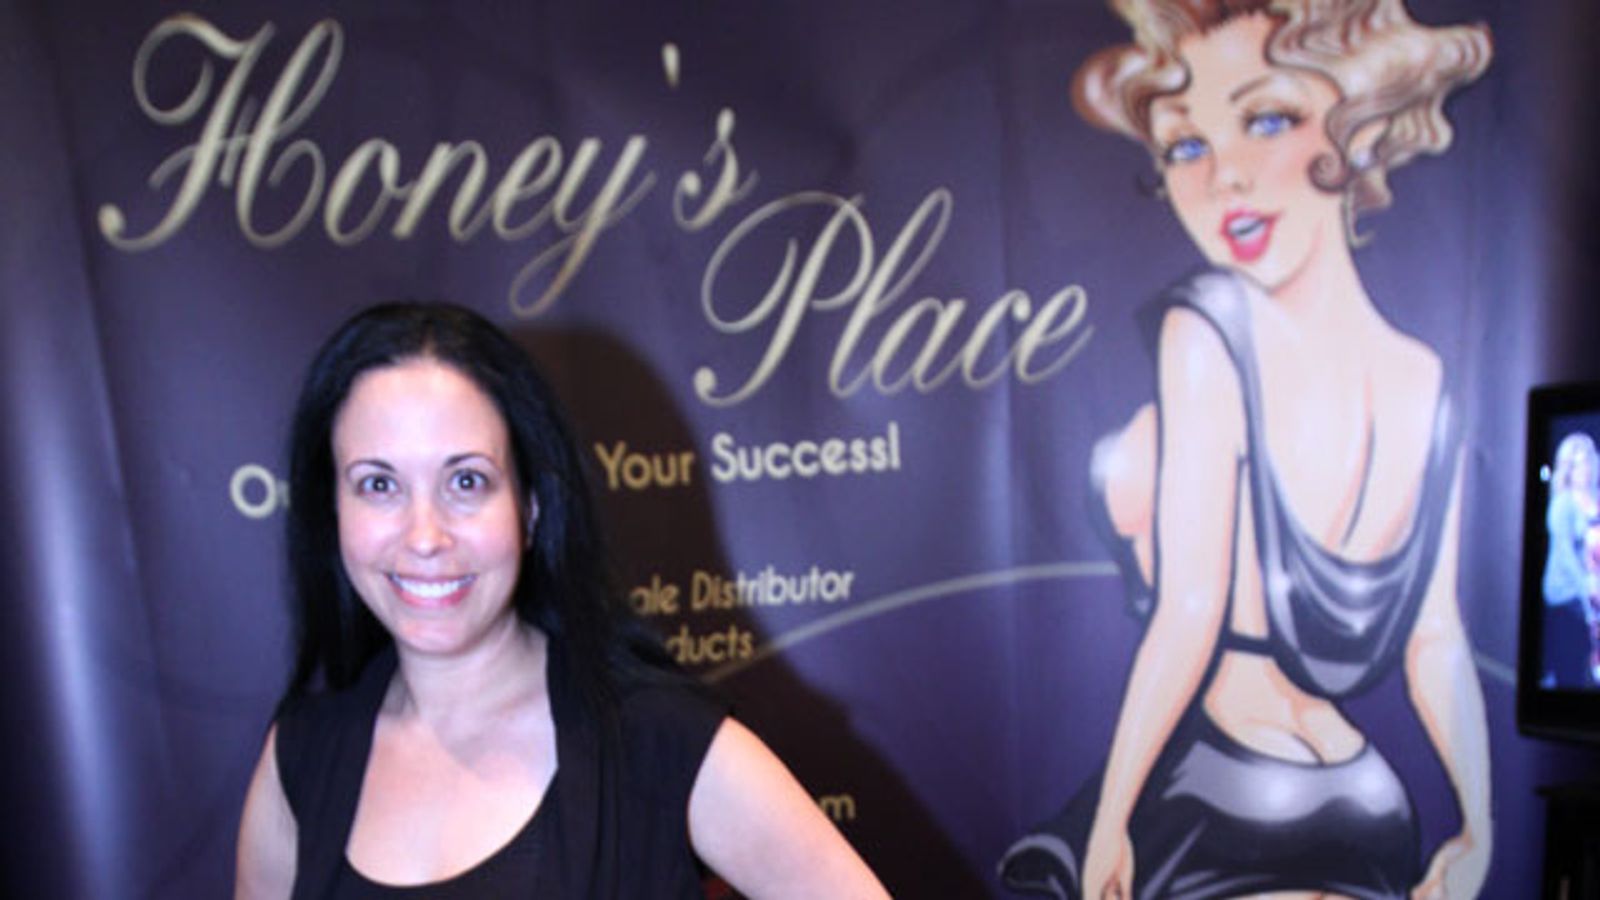 Honey’s Place Celebrates 20 Years of Putting Customers First